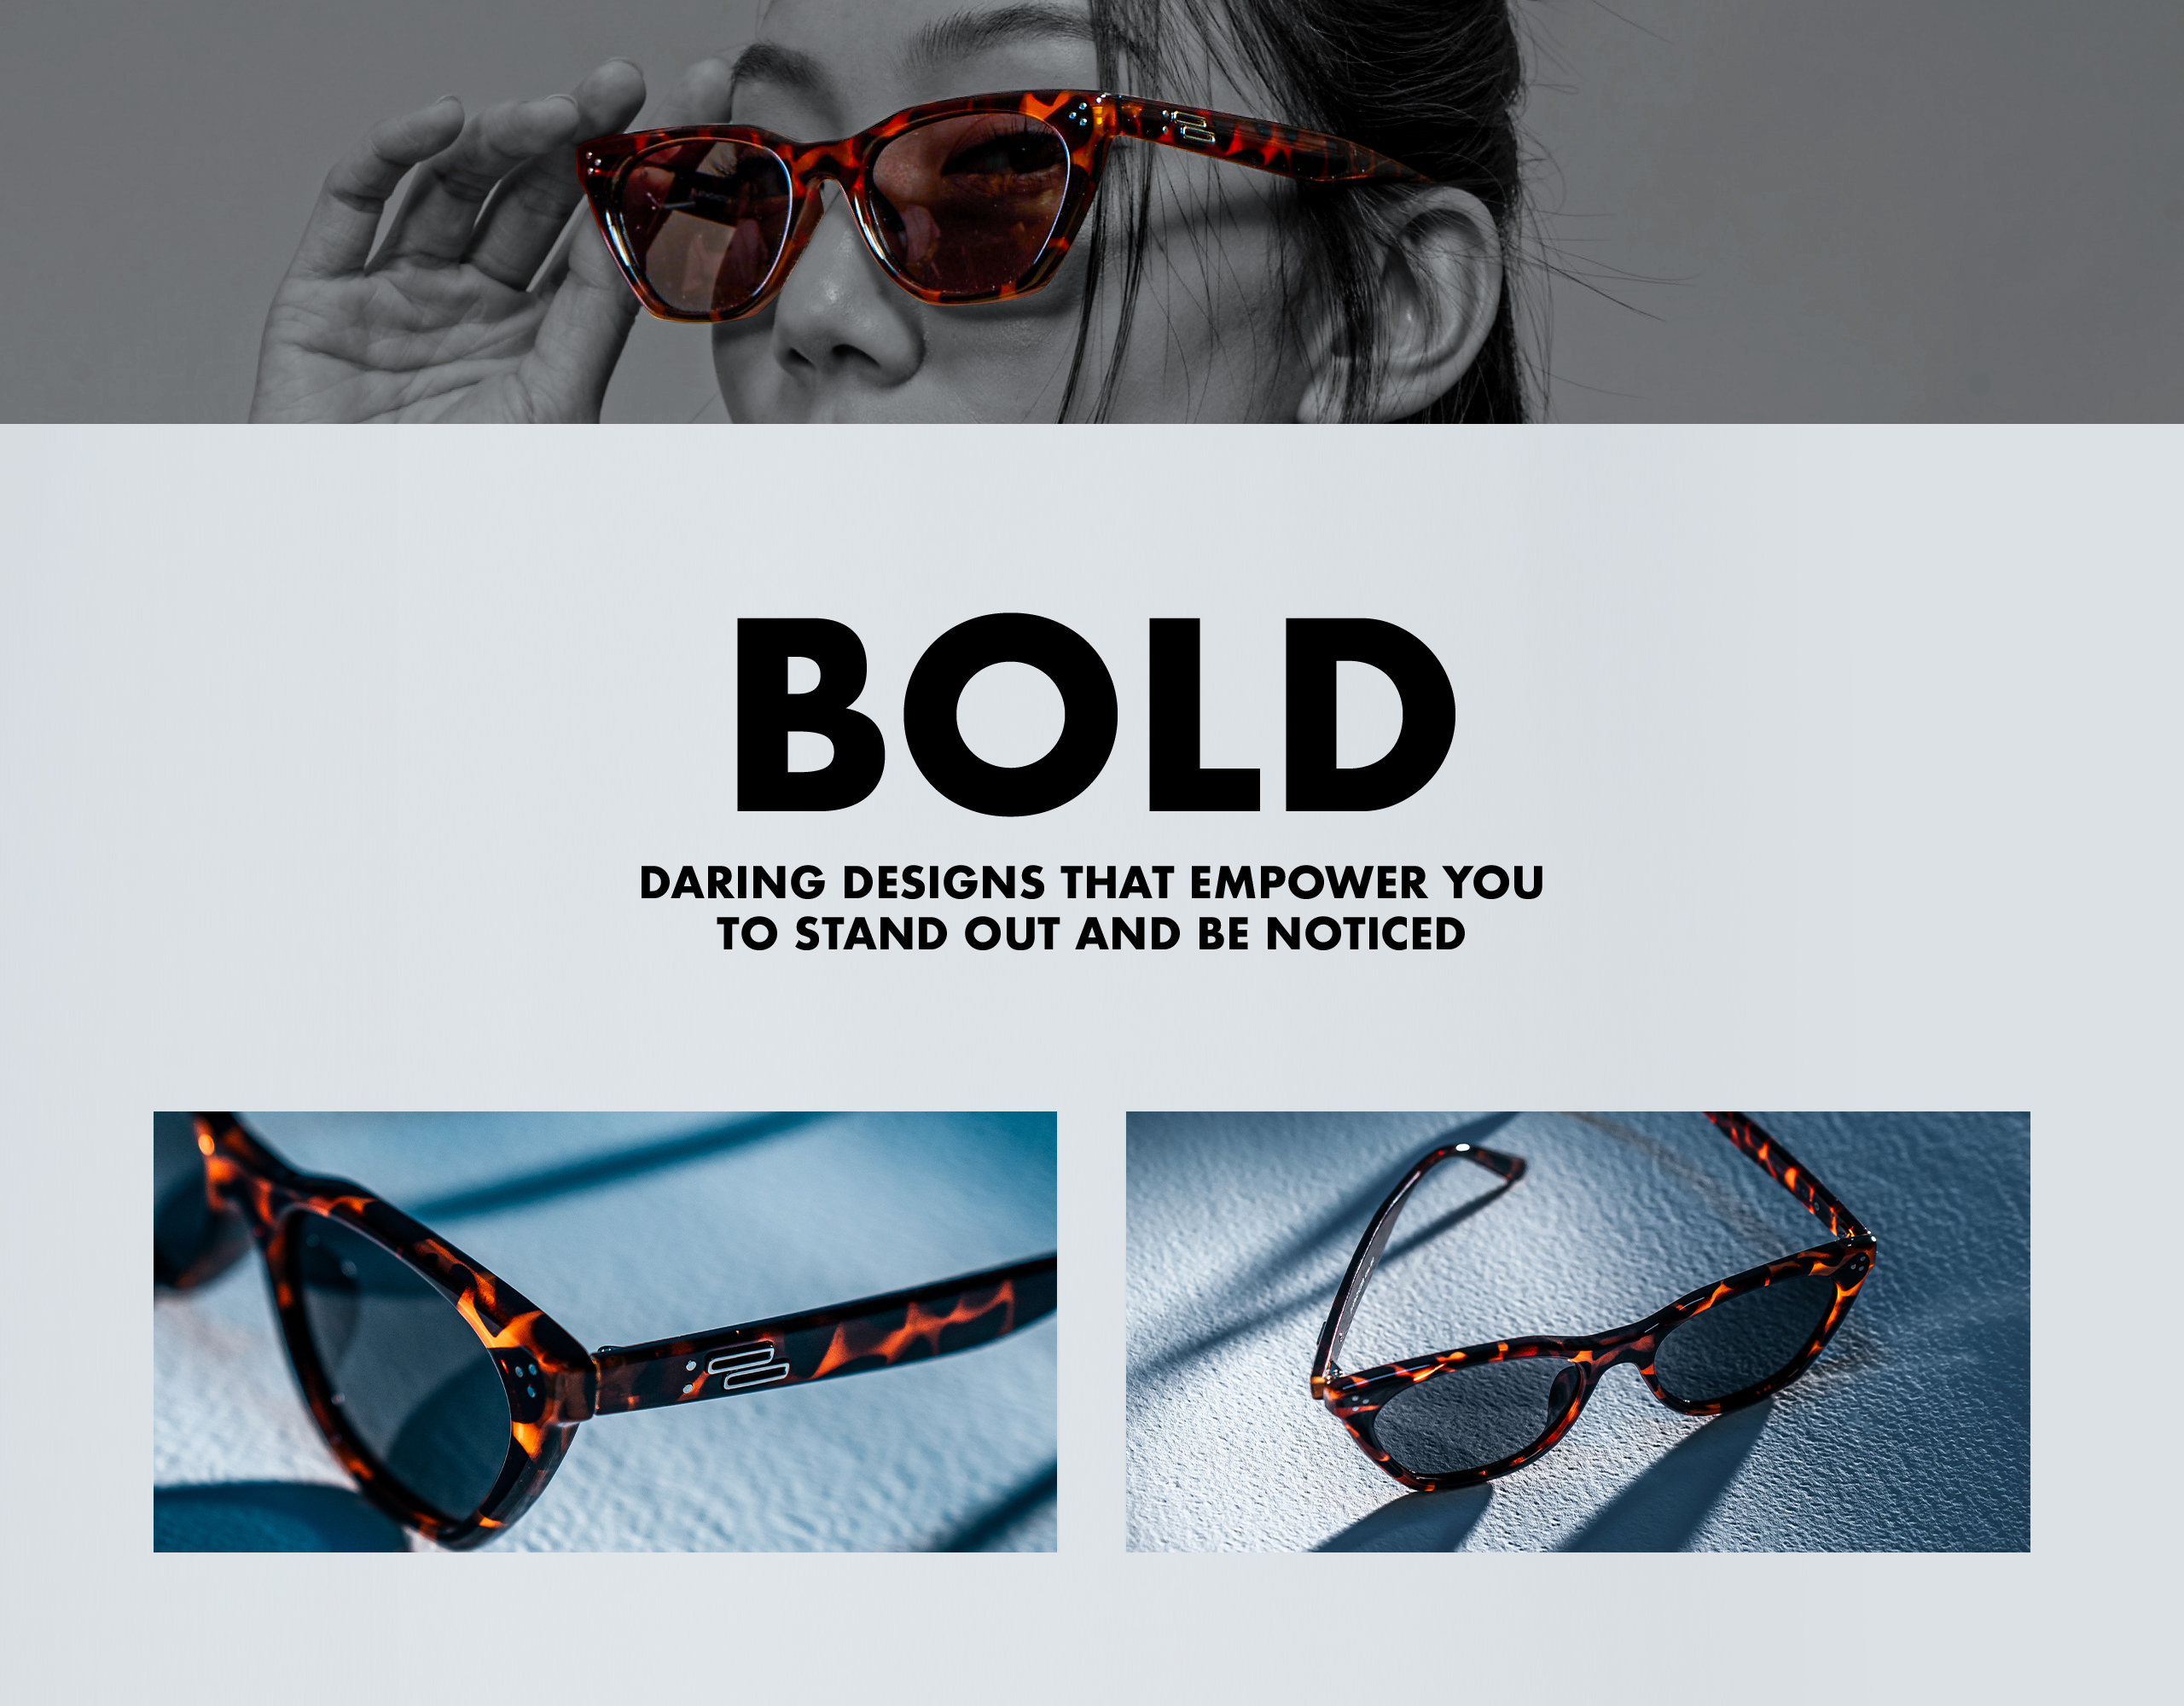 Bold - Daring designs that empower you to stand out and be noticed